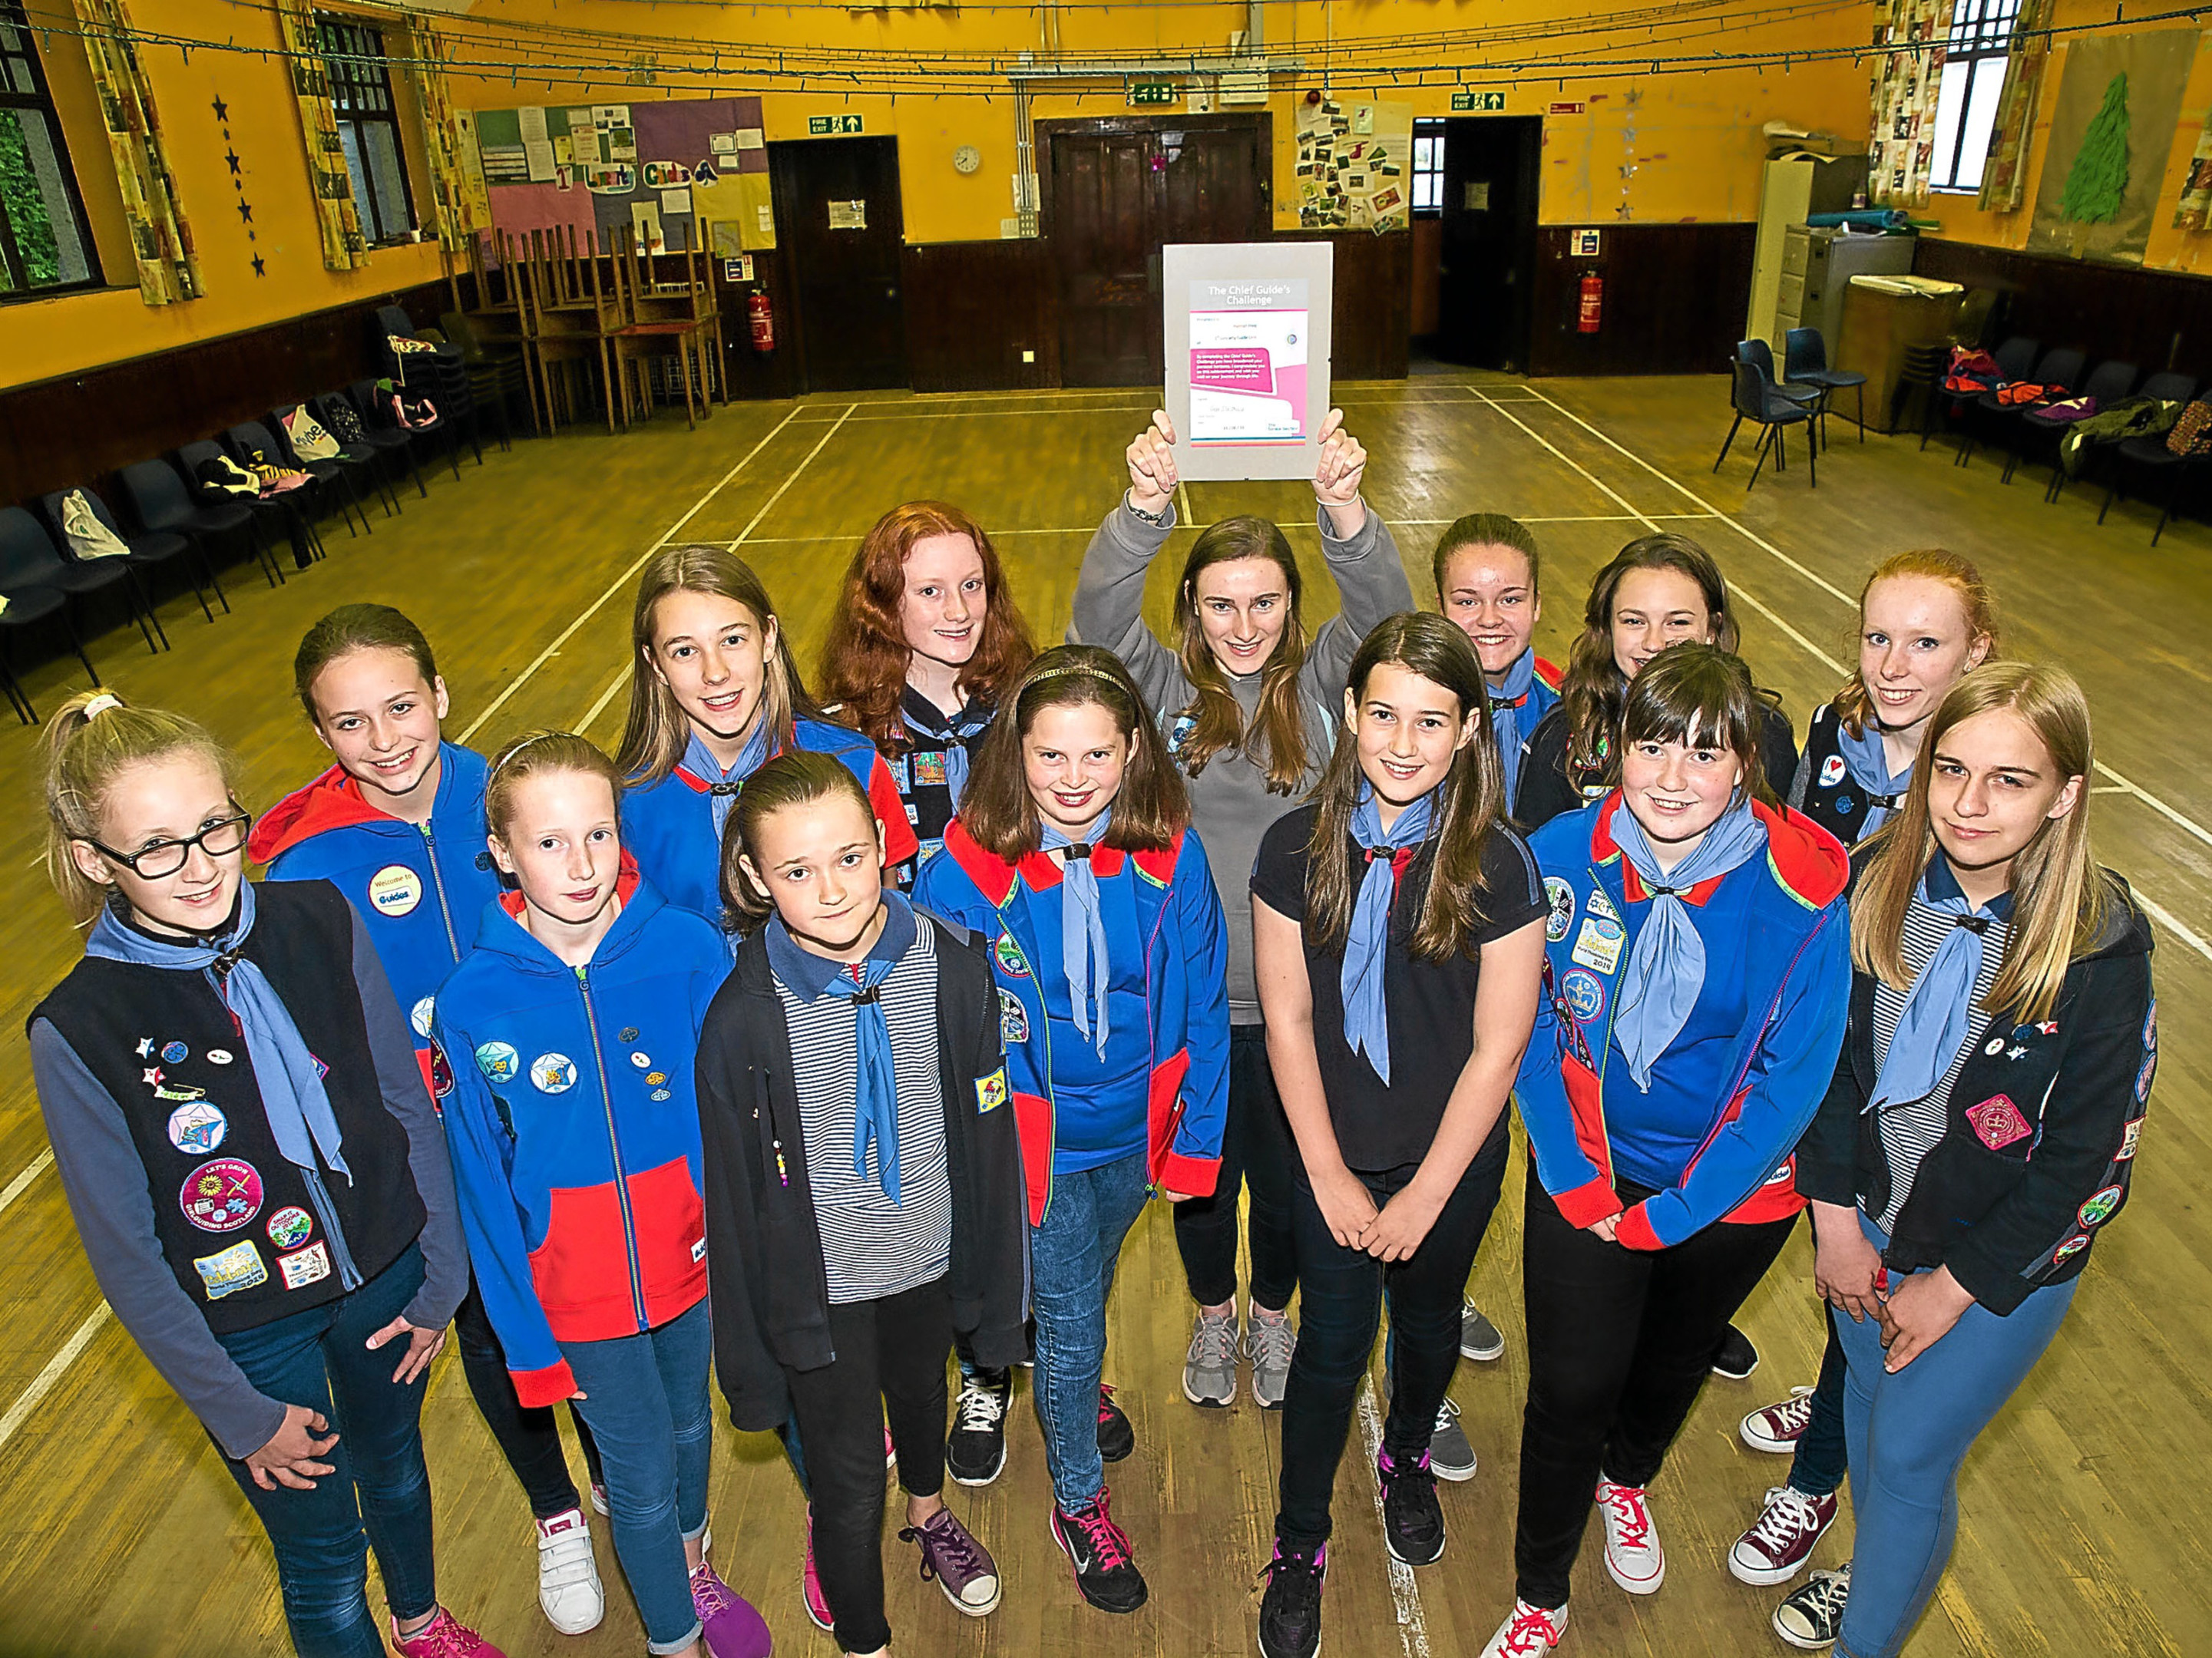 Hannah Haig holds aloft the Chief Guide's Challenge Award for young leaders surrounded by other guides in Luncarty village hall.